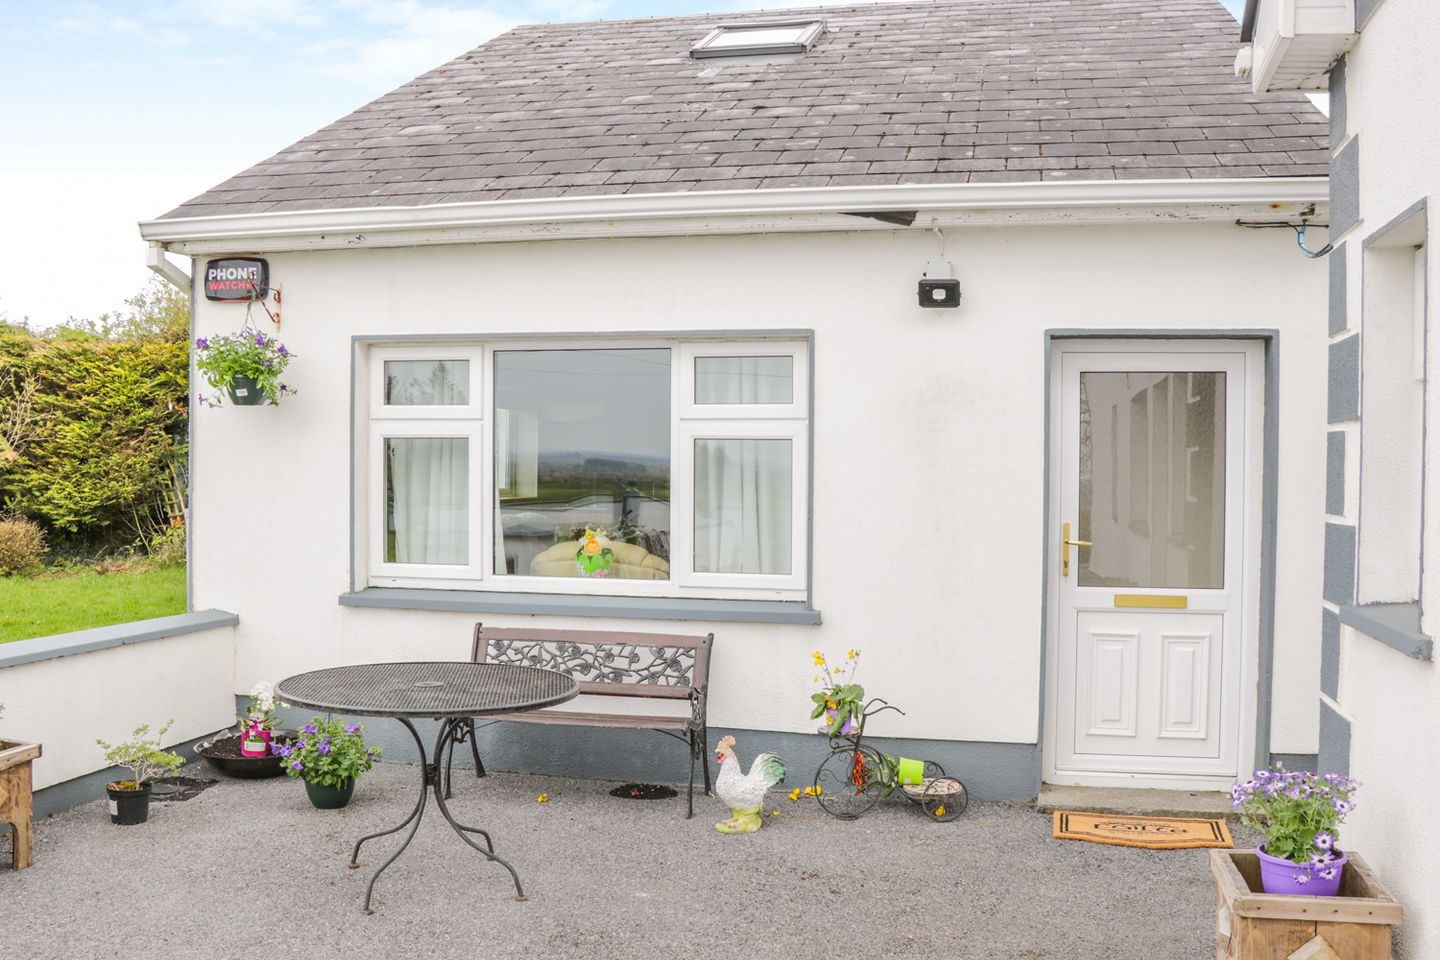 Ref. 1014863 Sunset View, Keelogues, Williamstown, Co. Galway